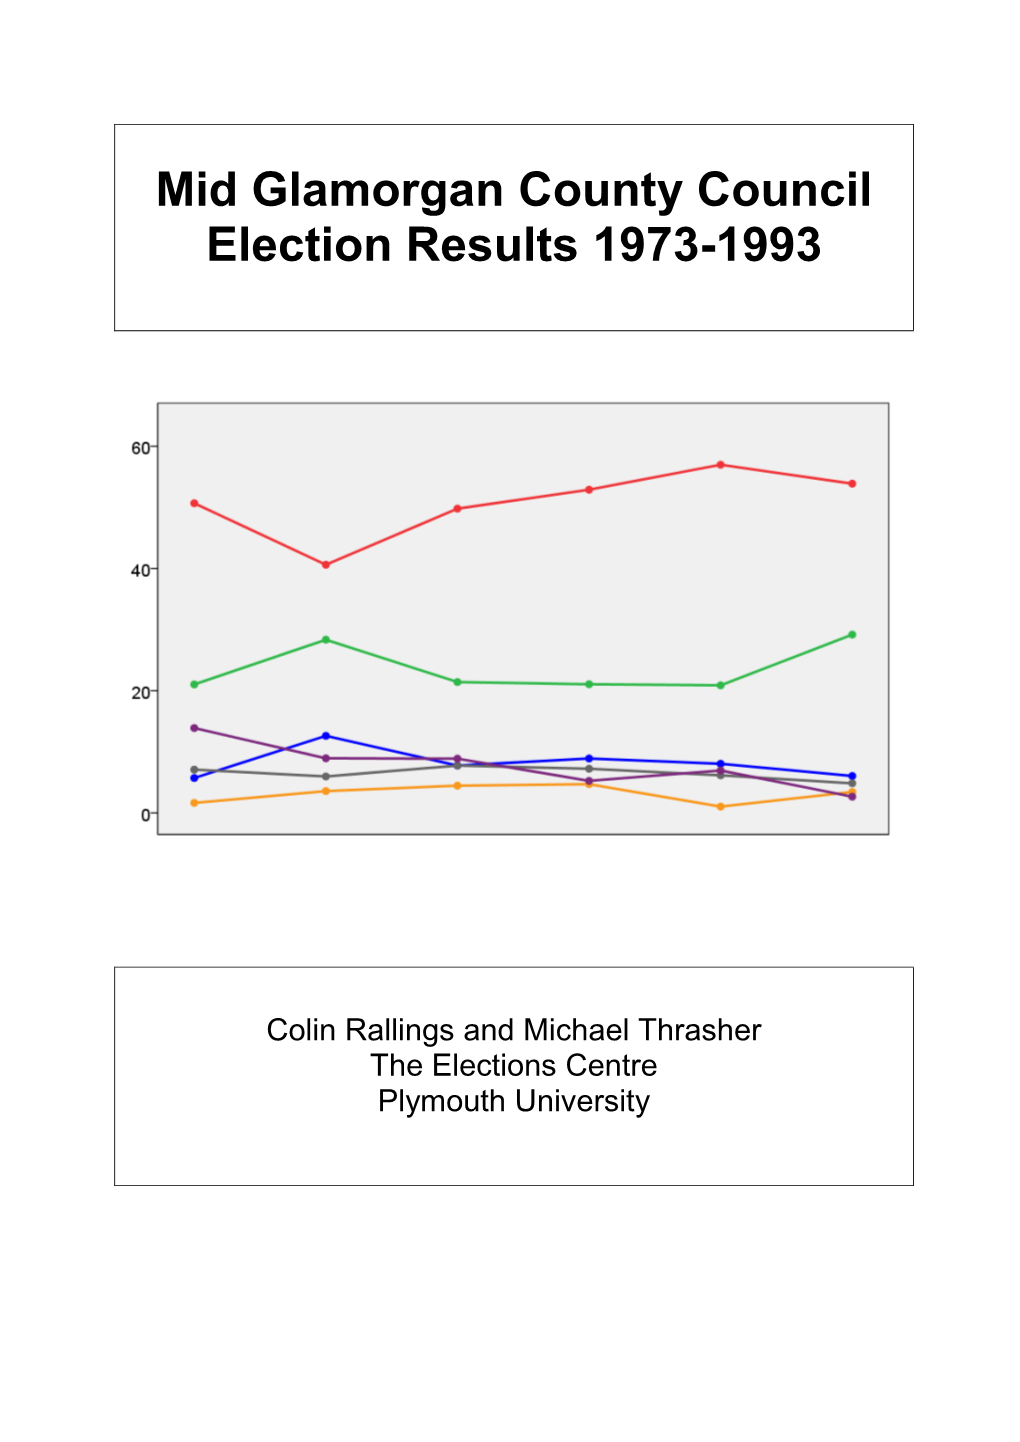 Mid Glamorgan County Council Election Results 1973-1993